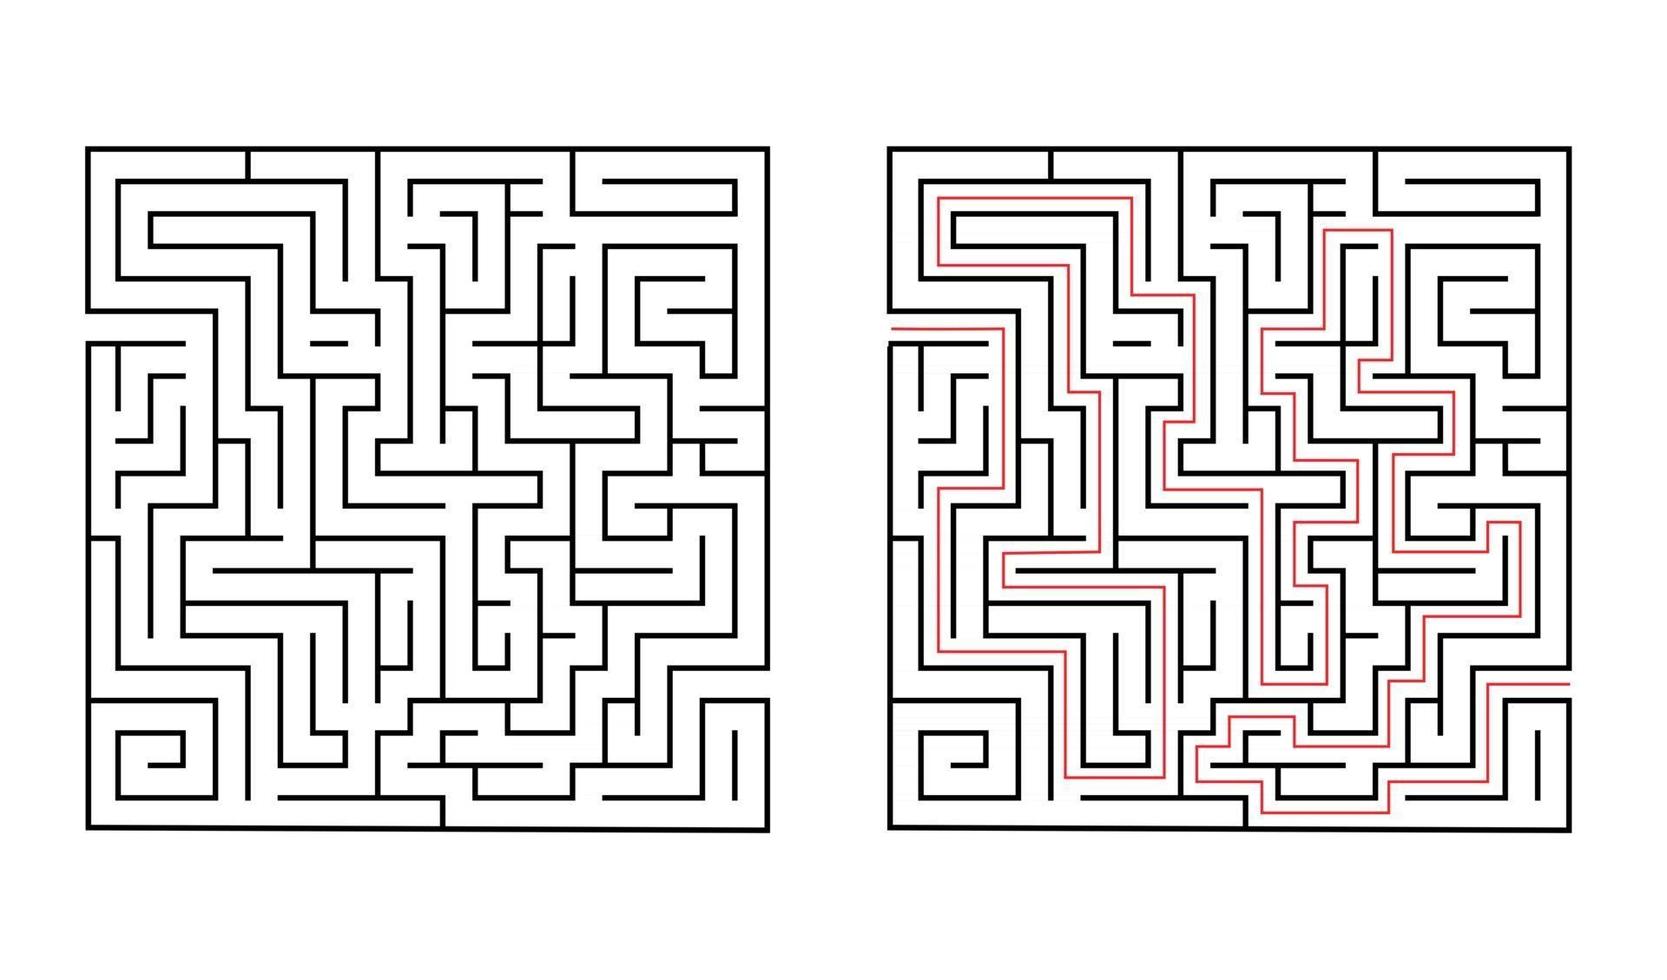 Square labyrinth maze game for children. Logic education vector